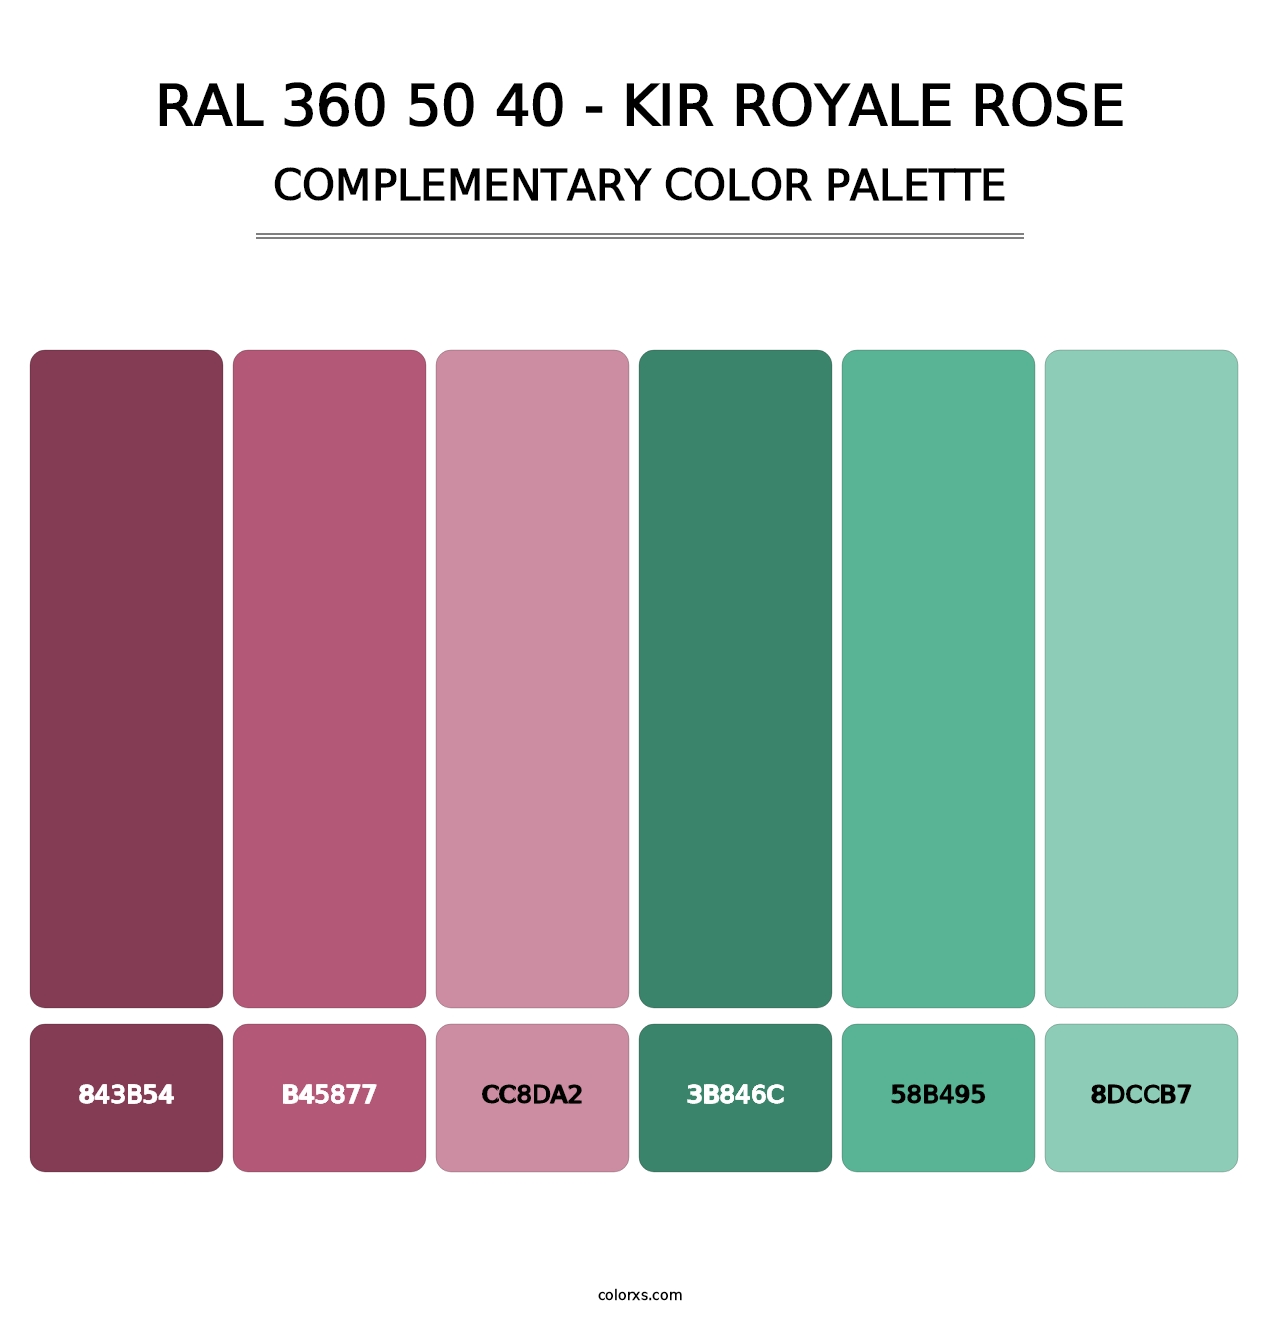 RAL 360 50 40 - Kir Royale Rose - Complementary Color Palette